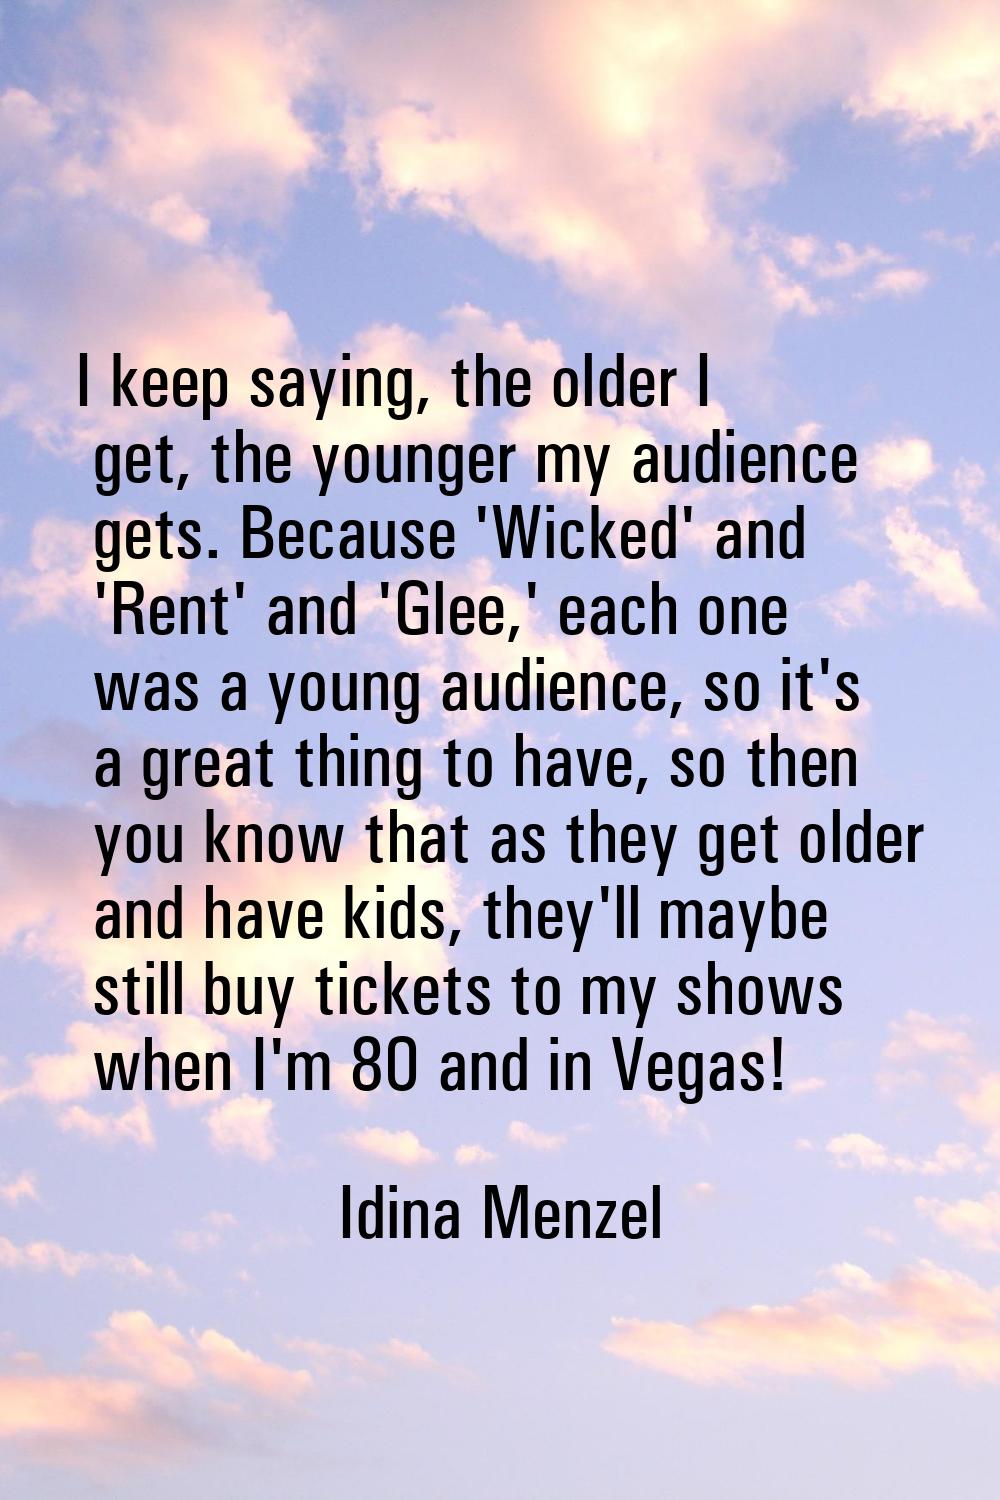 I keep saying, the older I get, the younger my audience gets. Because 'Wicked' and 'Rent' and 'Glee